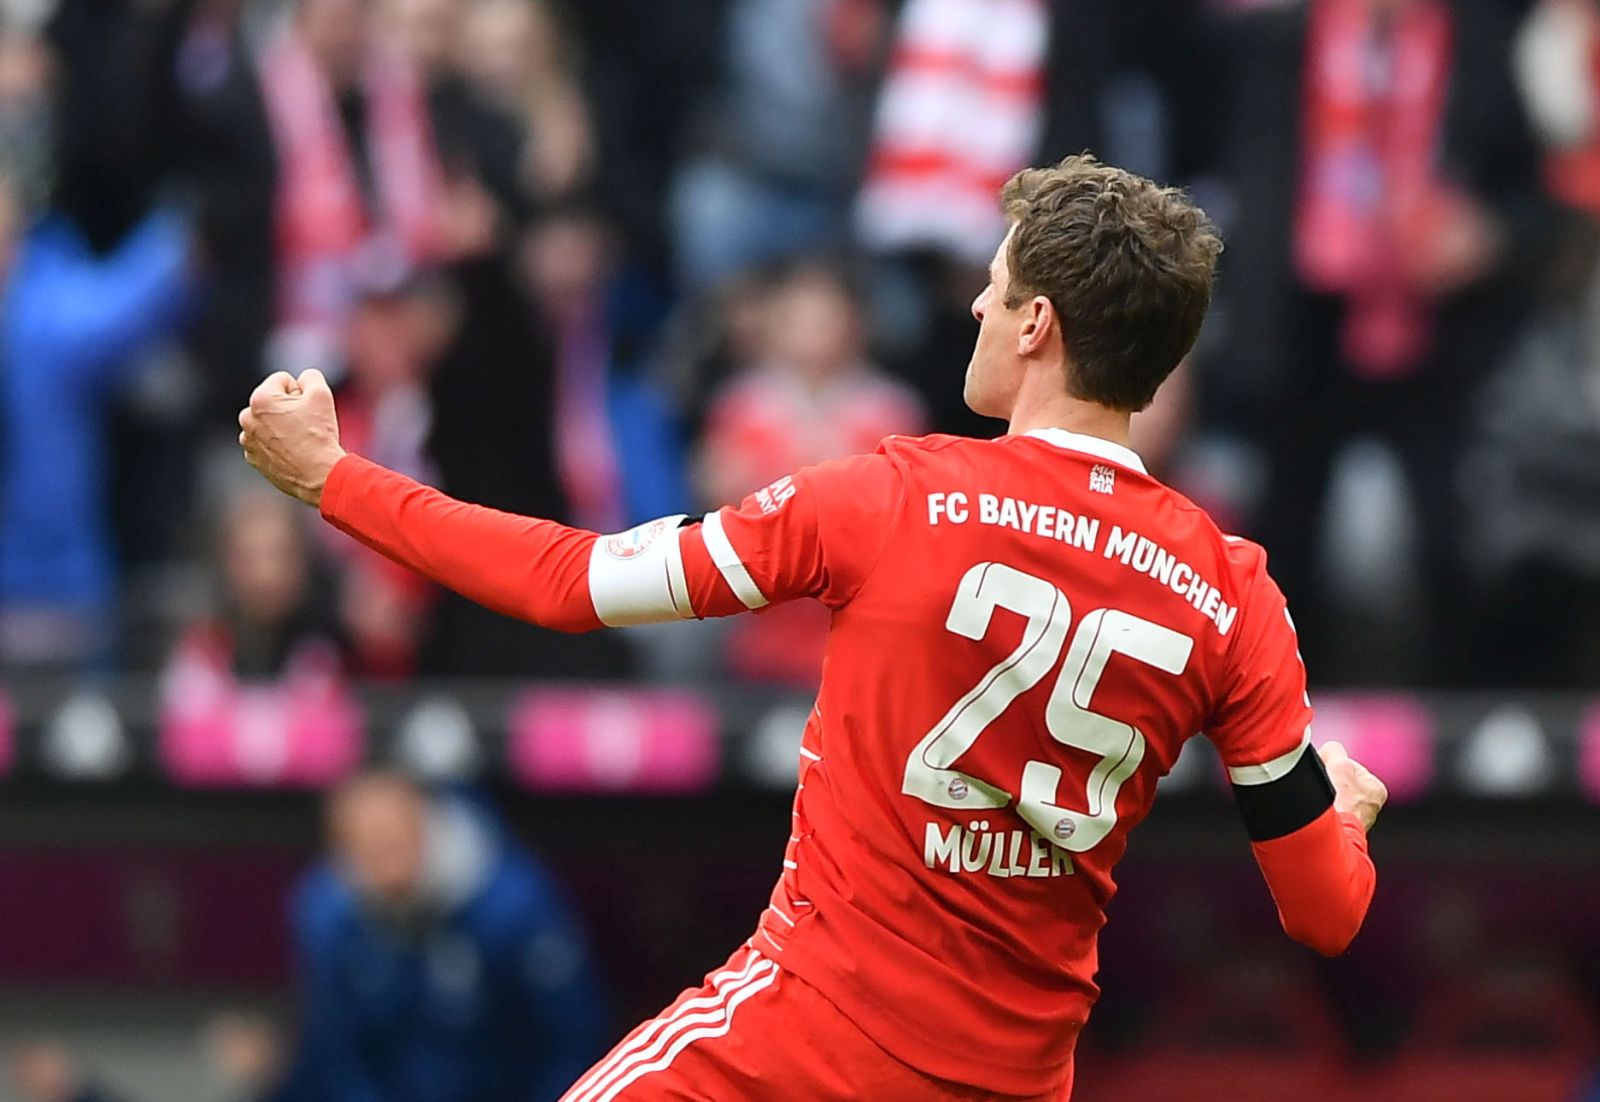 epa10460971 Munich's Thomas Mueller celebrates scoring the opening goal during the German Bundesliga soccer match between FC Bayern Munich and VfL Bochum in Munich, Germany, 11 February 2023.  EPA/ANNA SZILAGYI CONDITIONS - ATTENTION: The DFL regulations prohibit any use of photographs as image sequences and/or quasi-video.